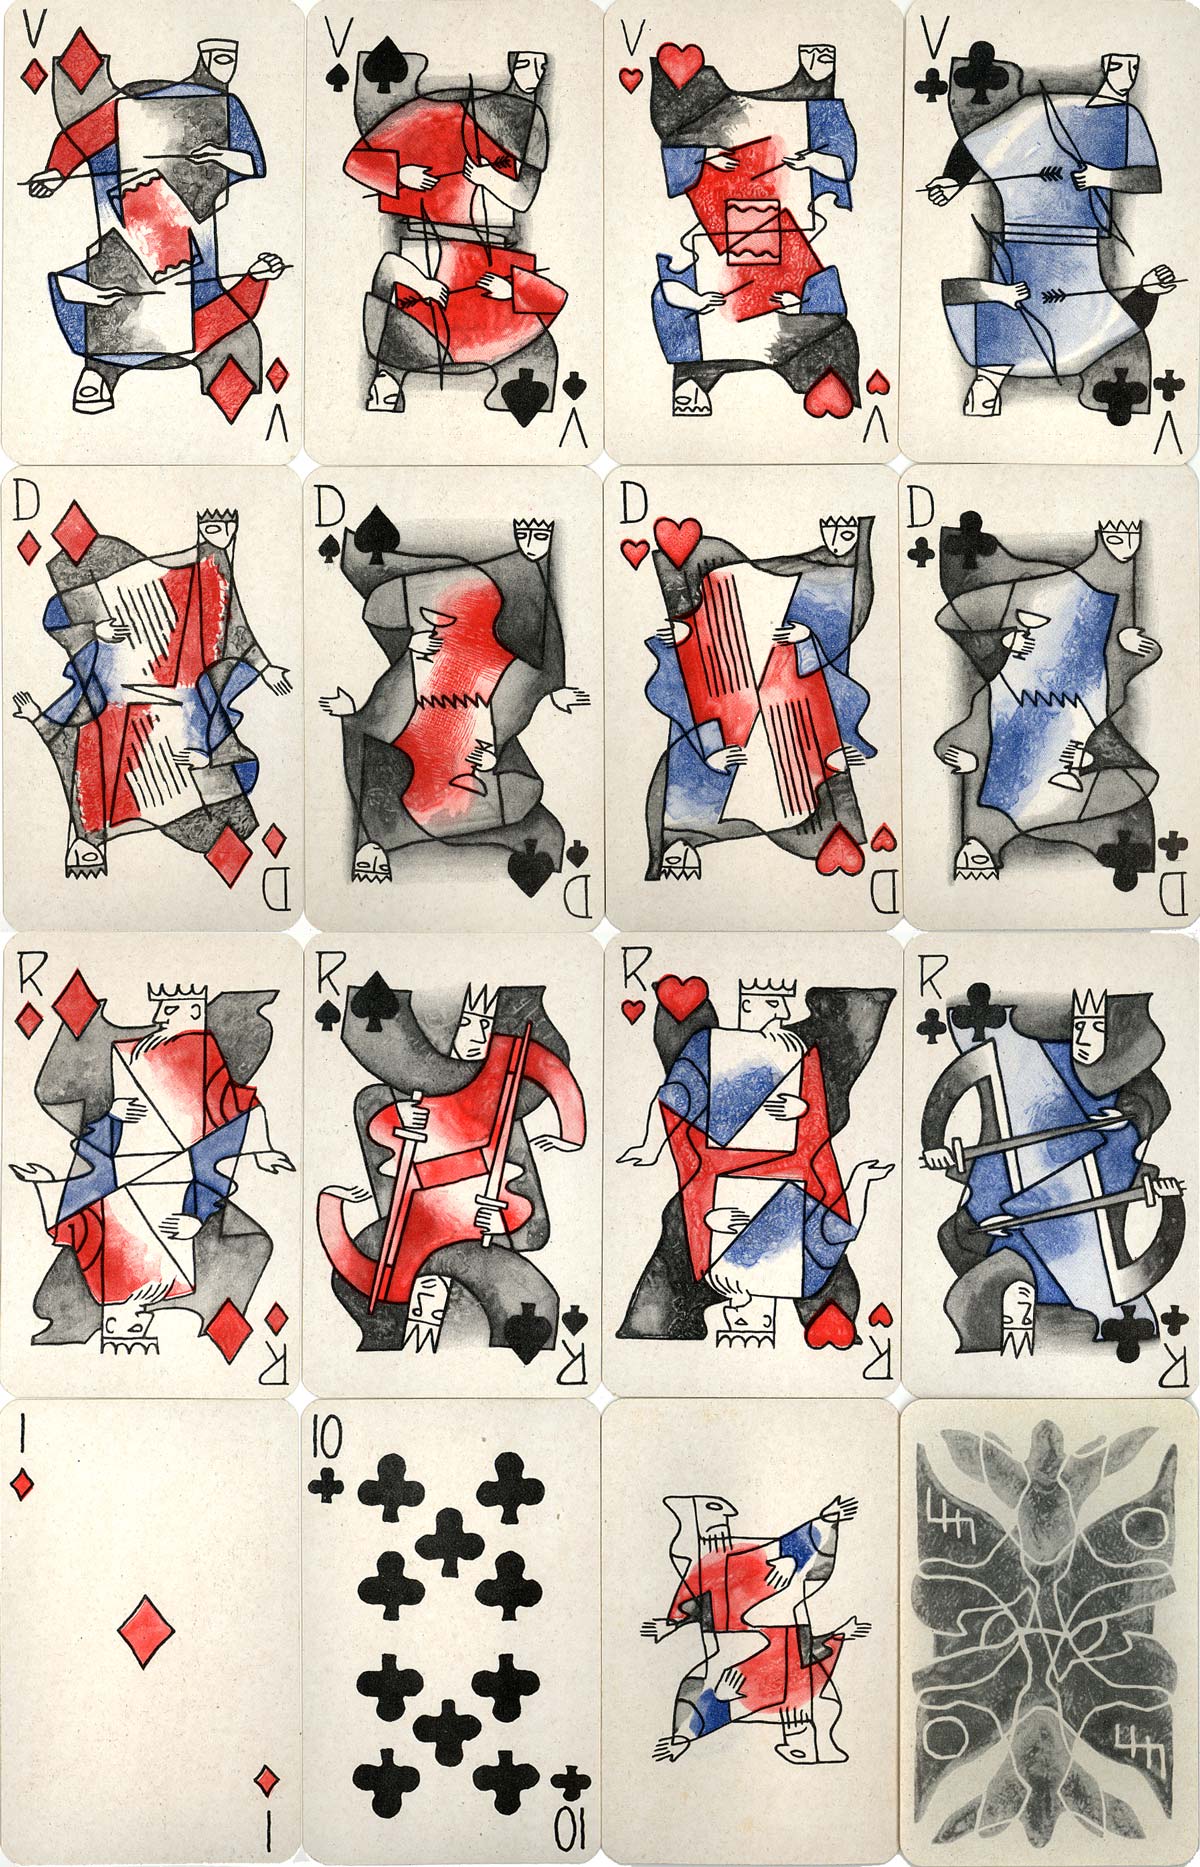 Cubist style playing cards designed by Renée Sturbelle, 1947